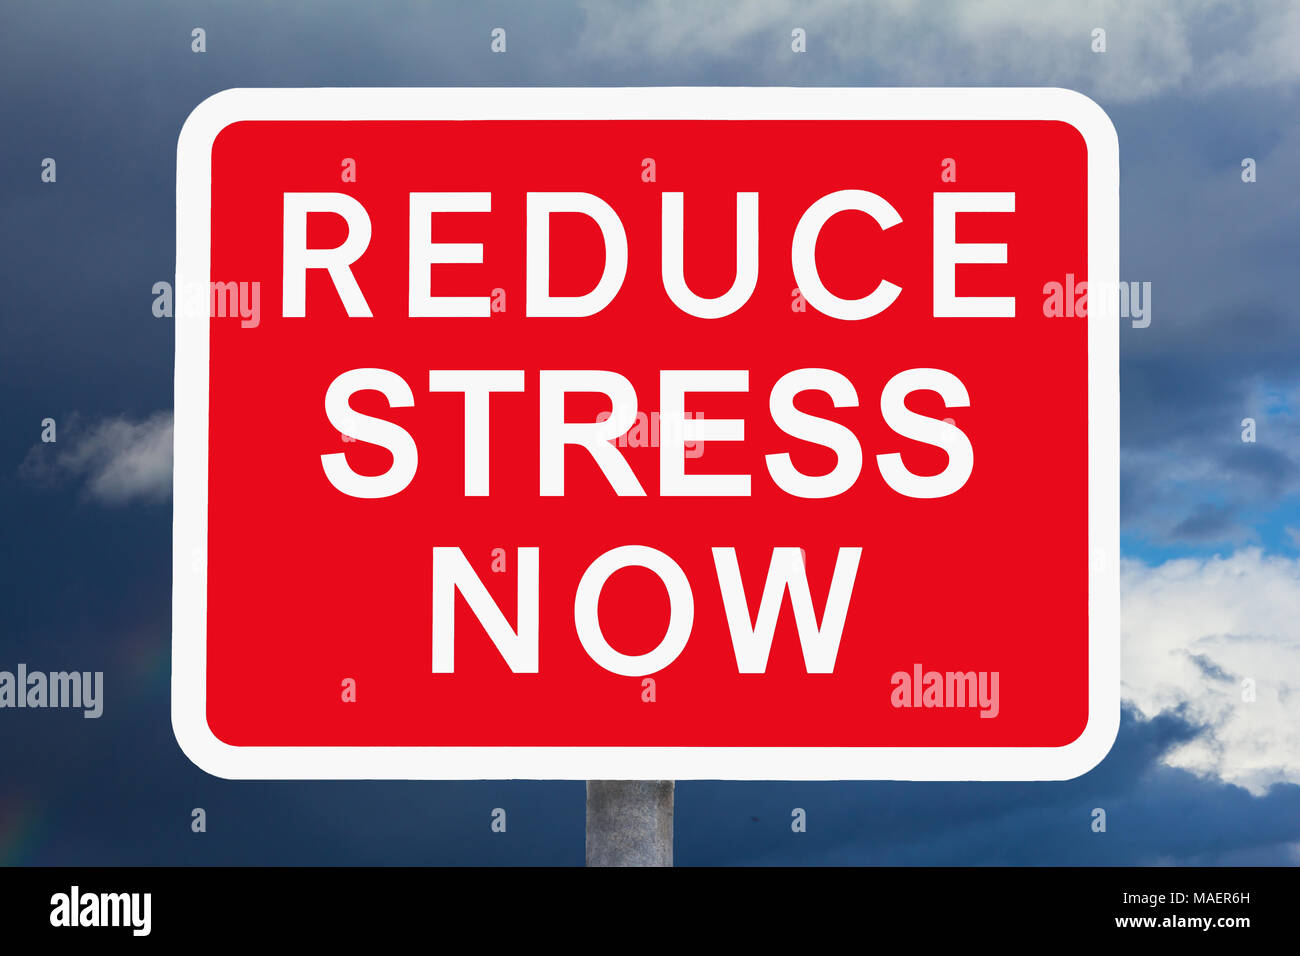 Red and white warning sign REDUCE STRESS NOW in front of a dark sky, symbol for health risk, variation of a british traffic sign Stock Photo